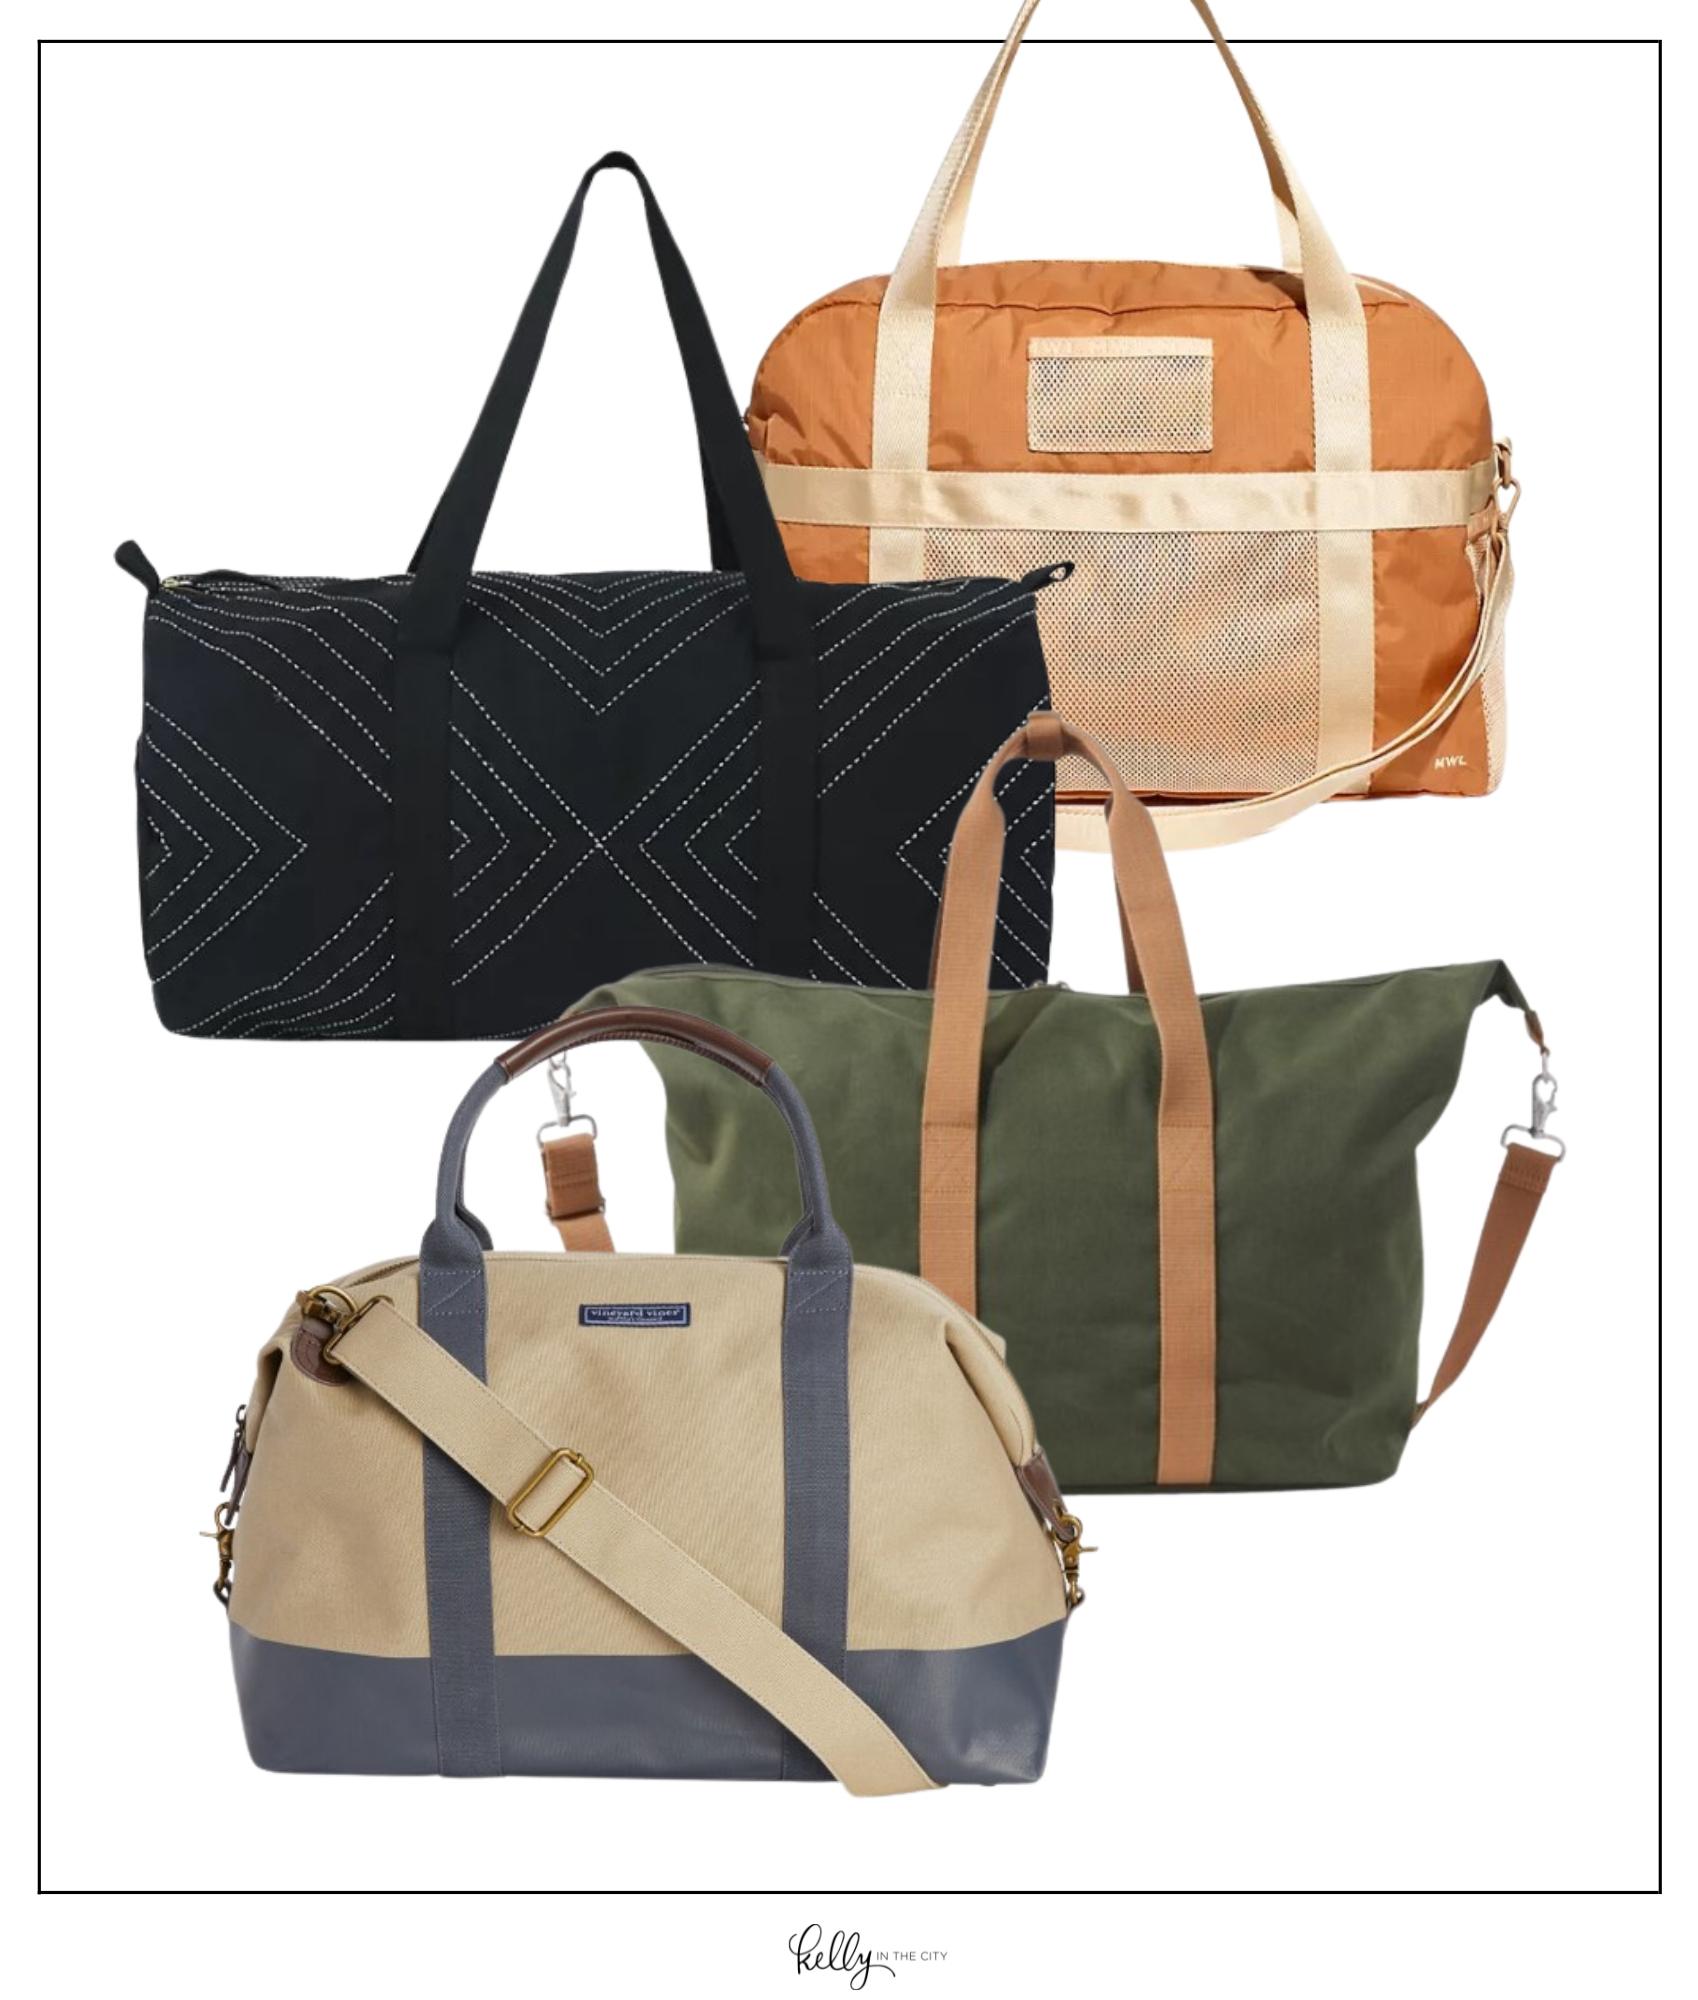 kelly in the city handpicked bags for travel